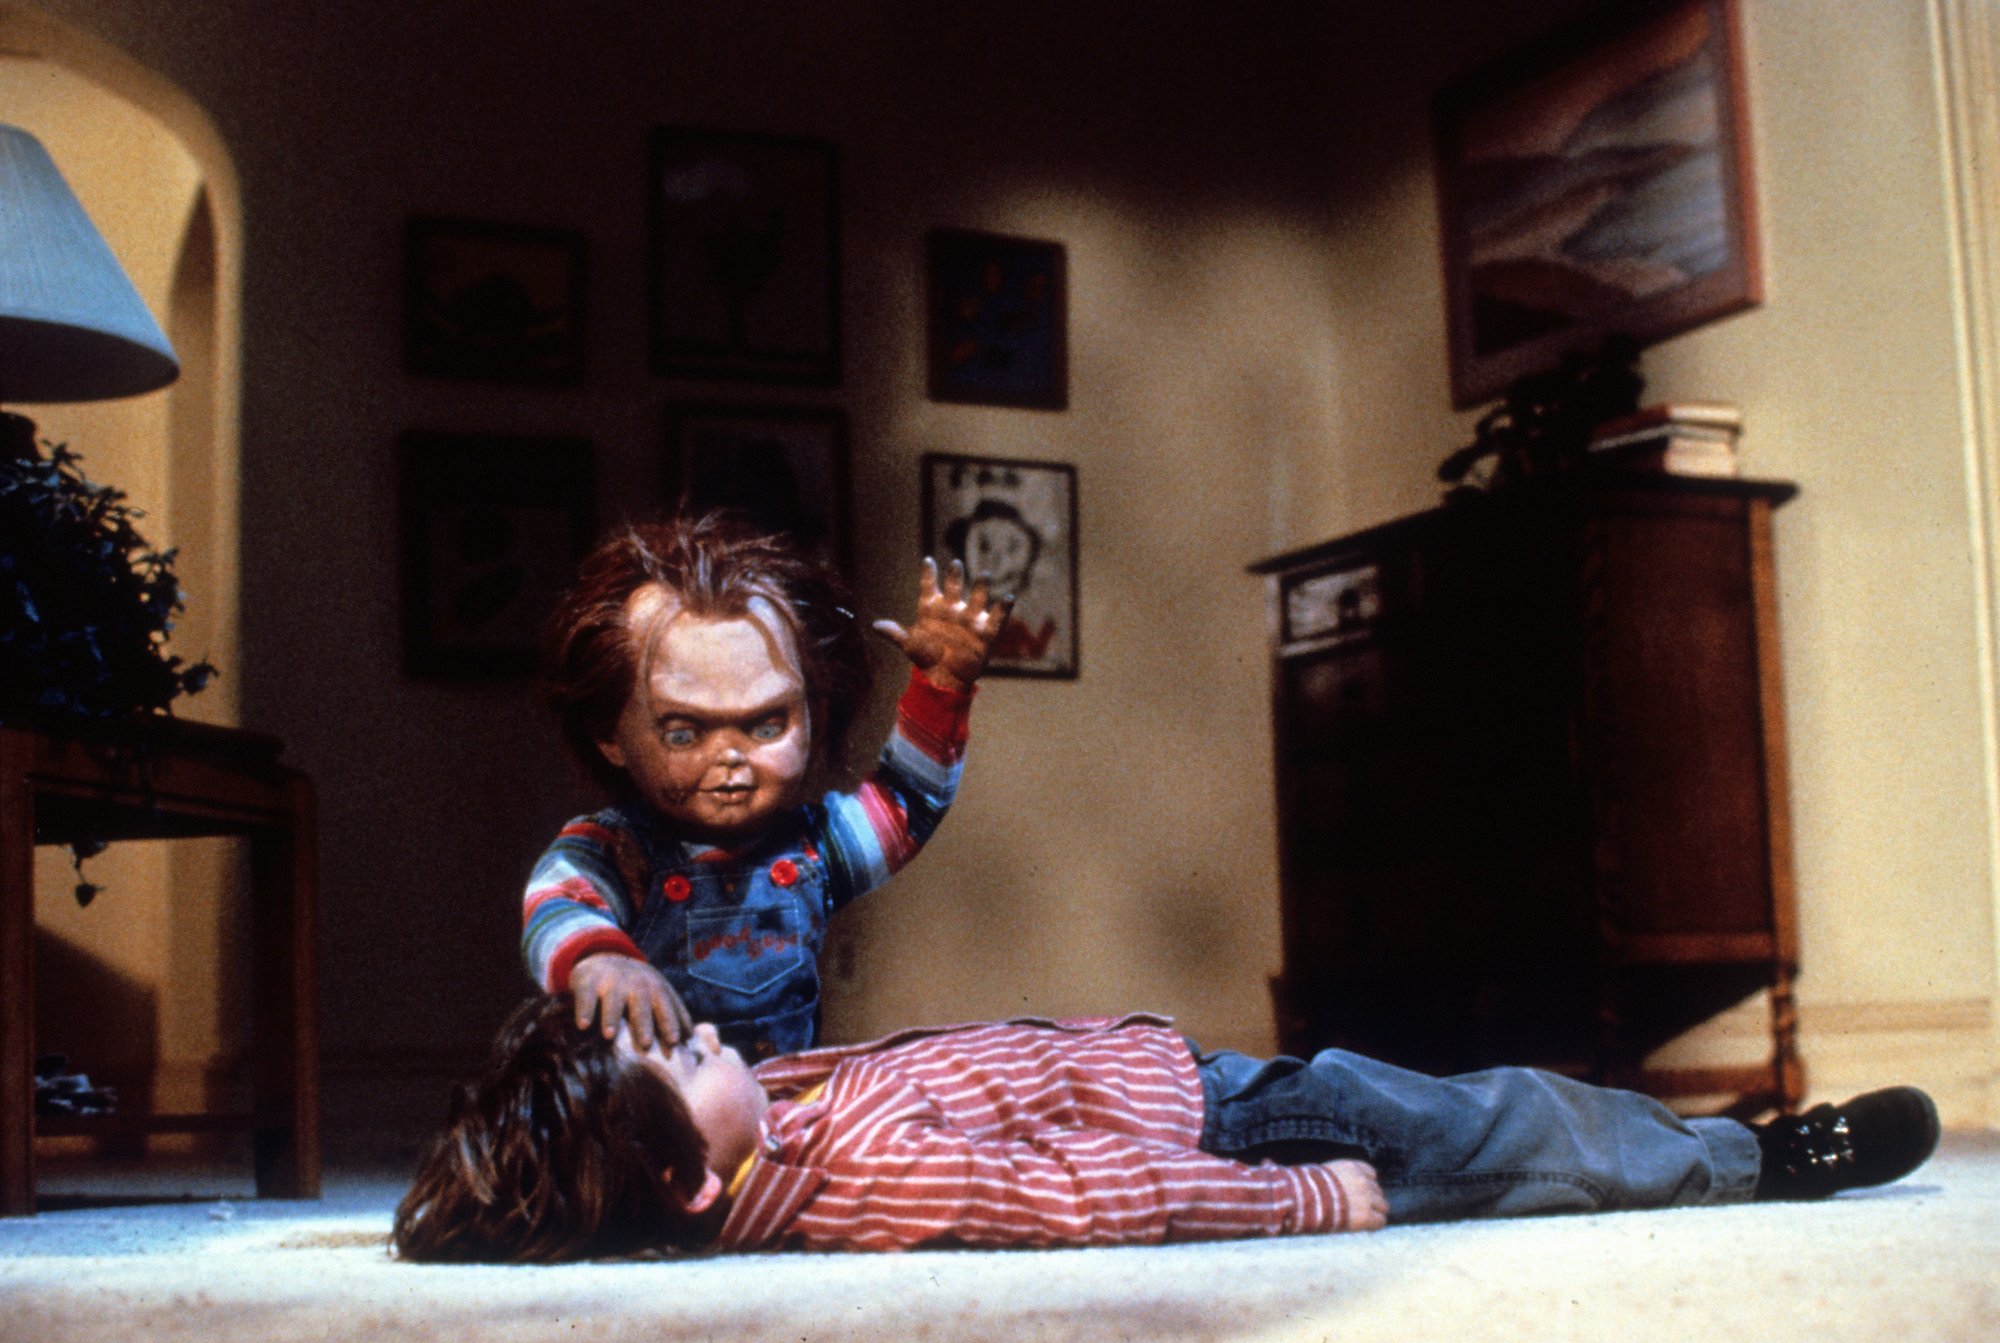 Child's Play: Chucky tries to possess Andy